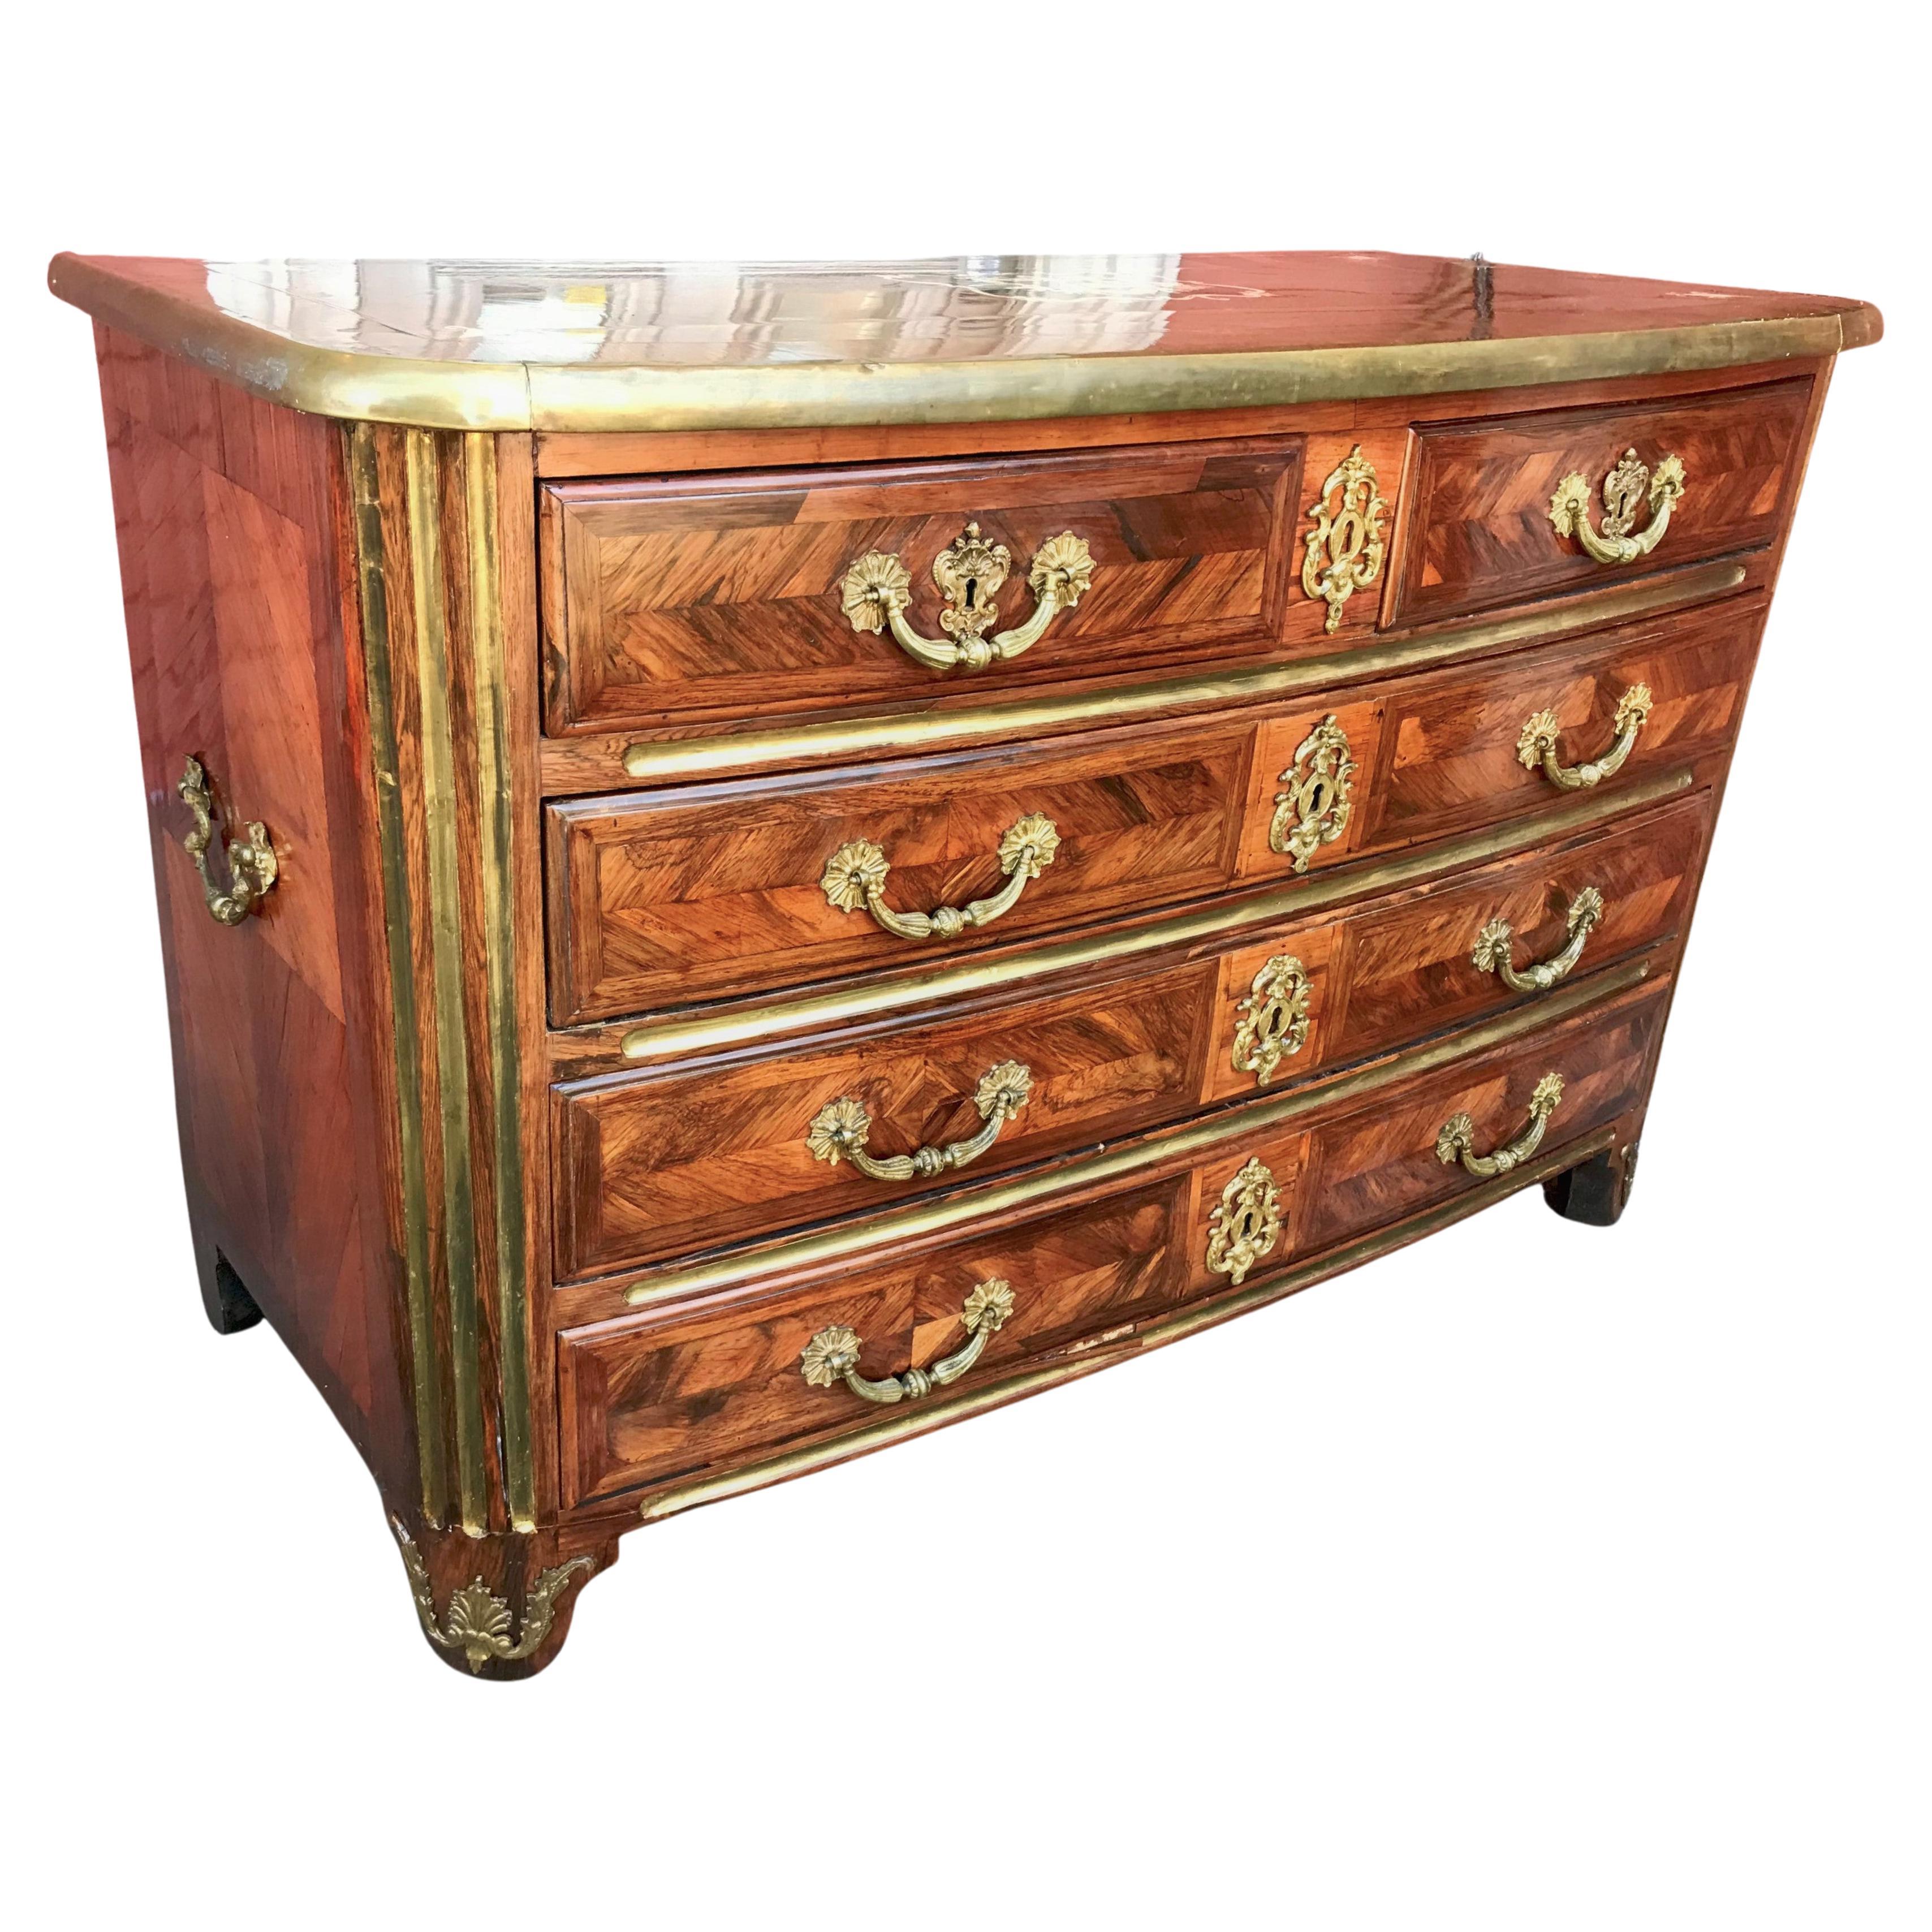 Regence Kingwood Commode Early 18th Century with Gilded Mounts